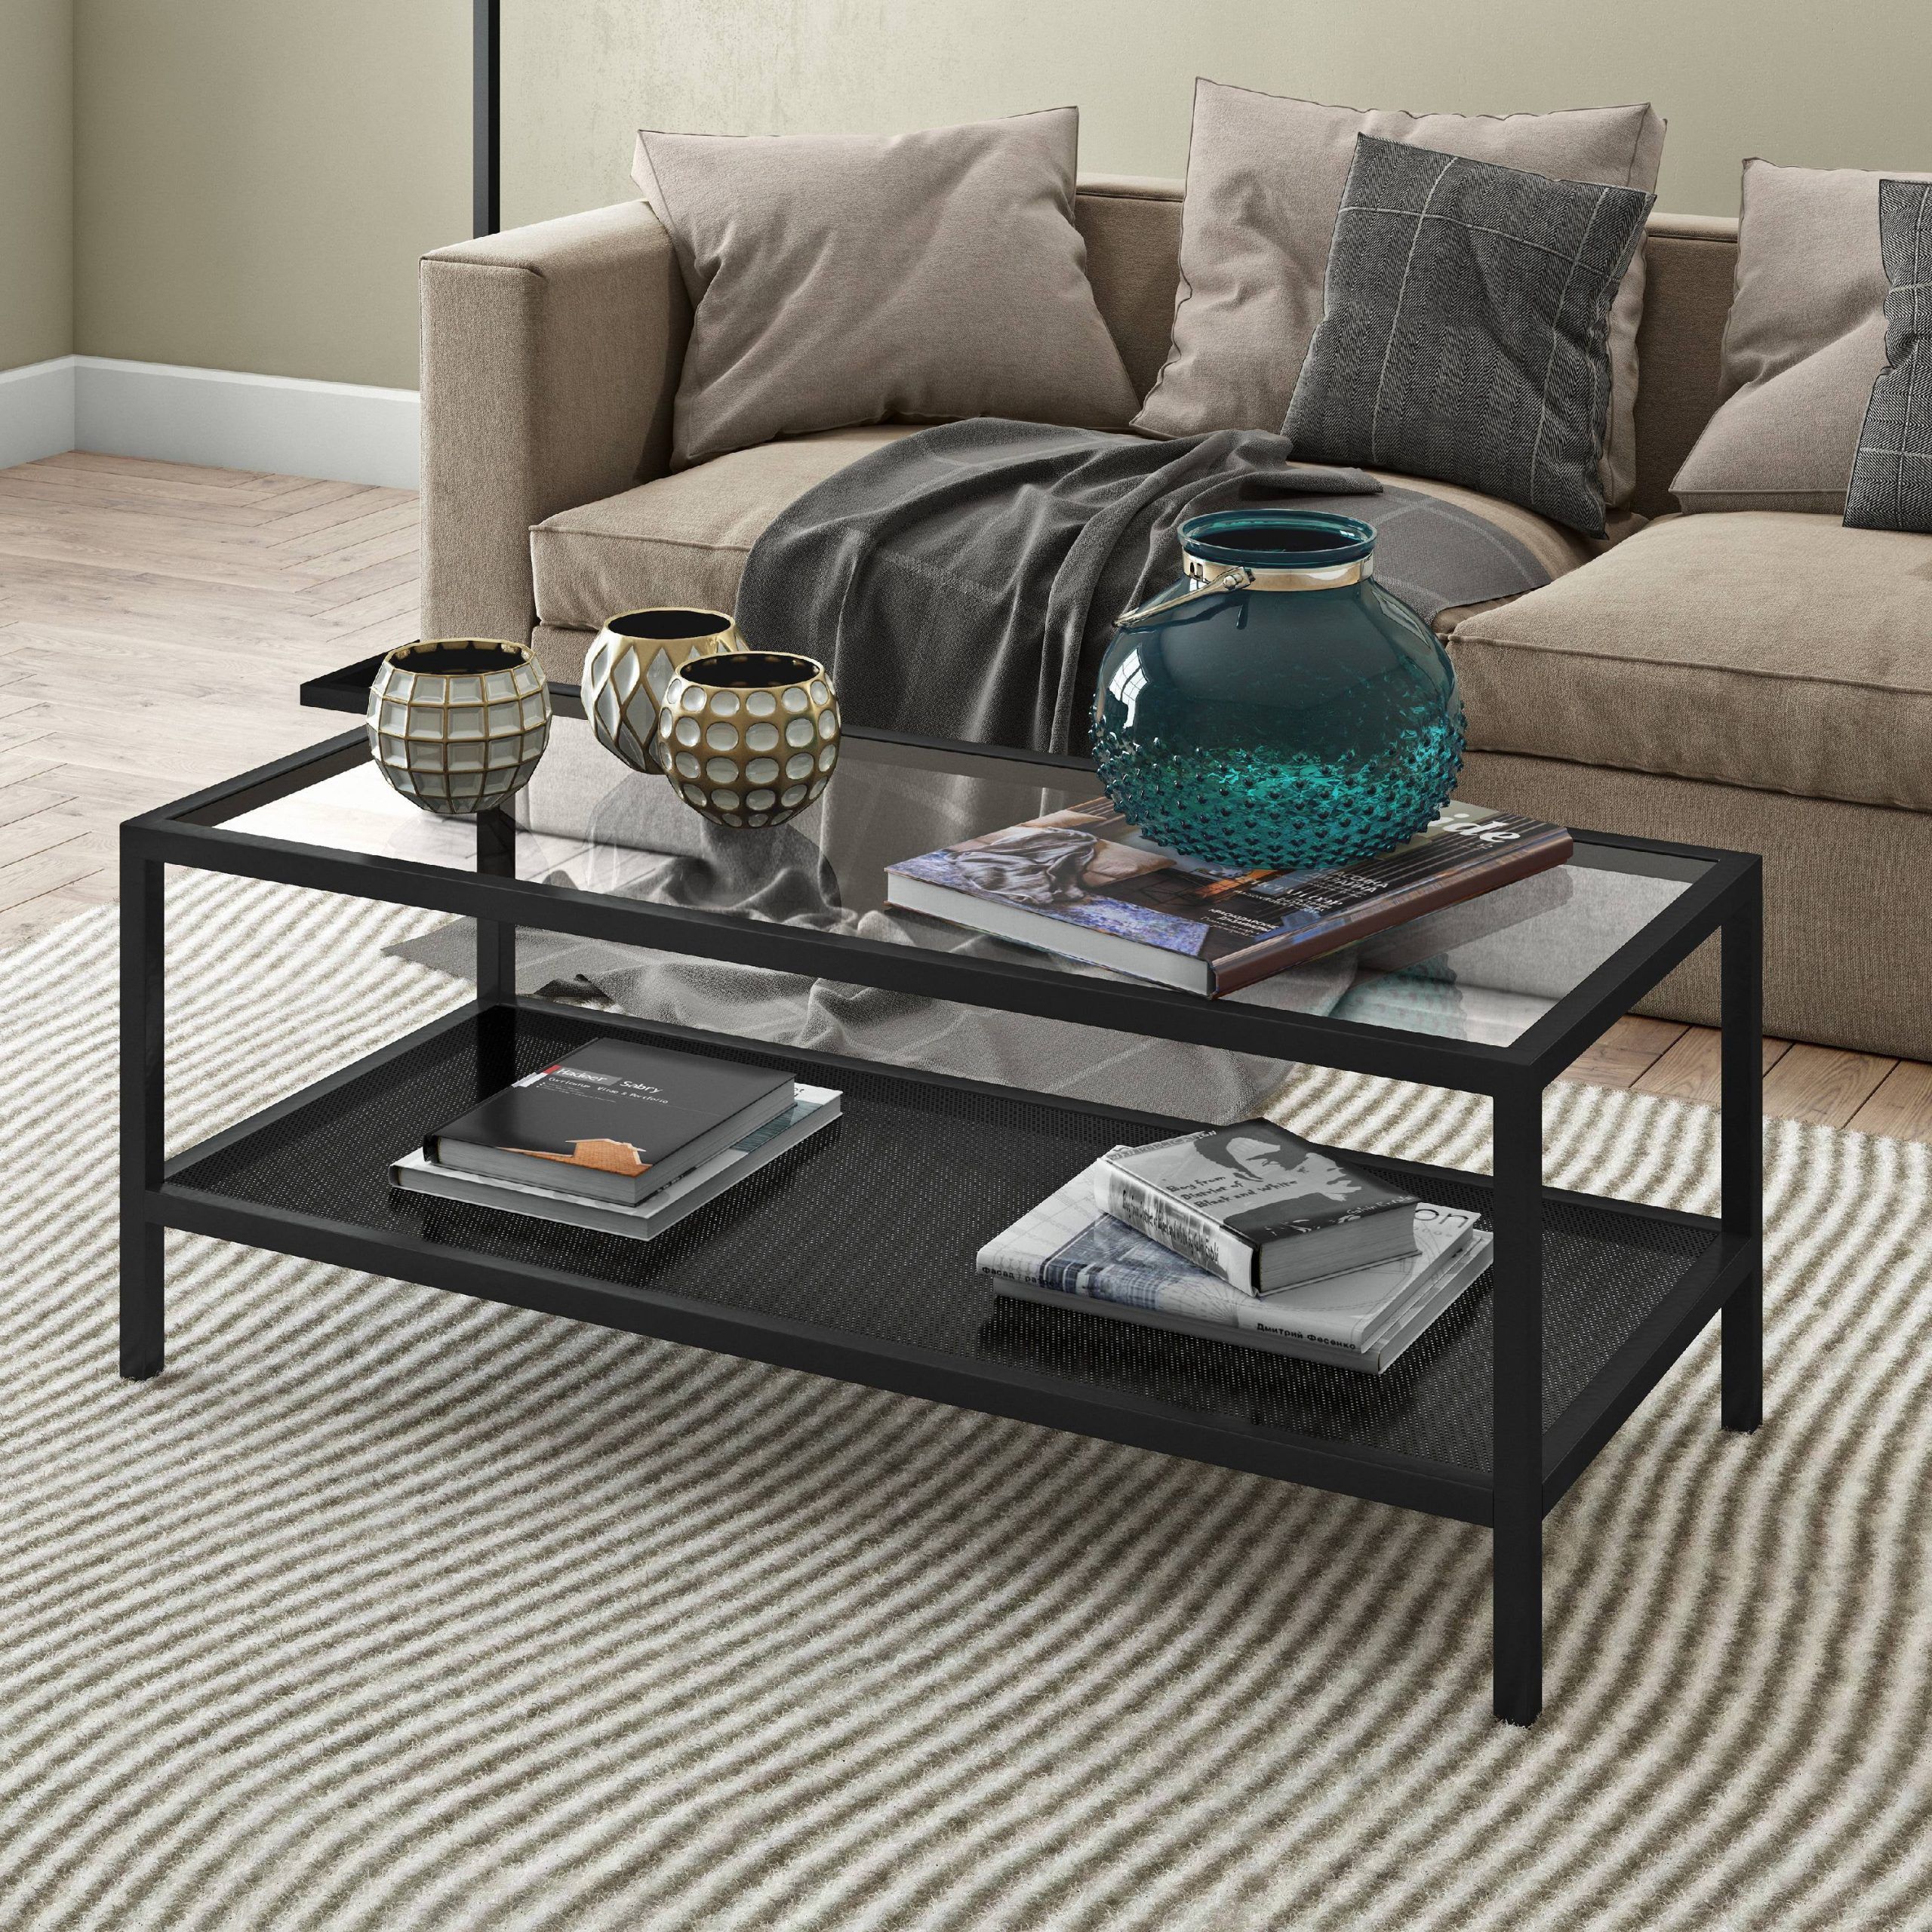 Evelyn&zoe Contemporary Metal Coffee Table With Glass Top – Walmart With Glass Coffee Tables With Lower Shelves (Gallery 19 of 20)